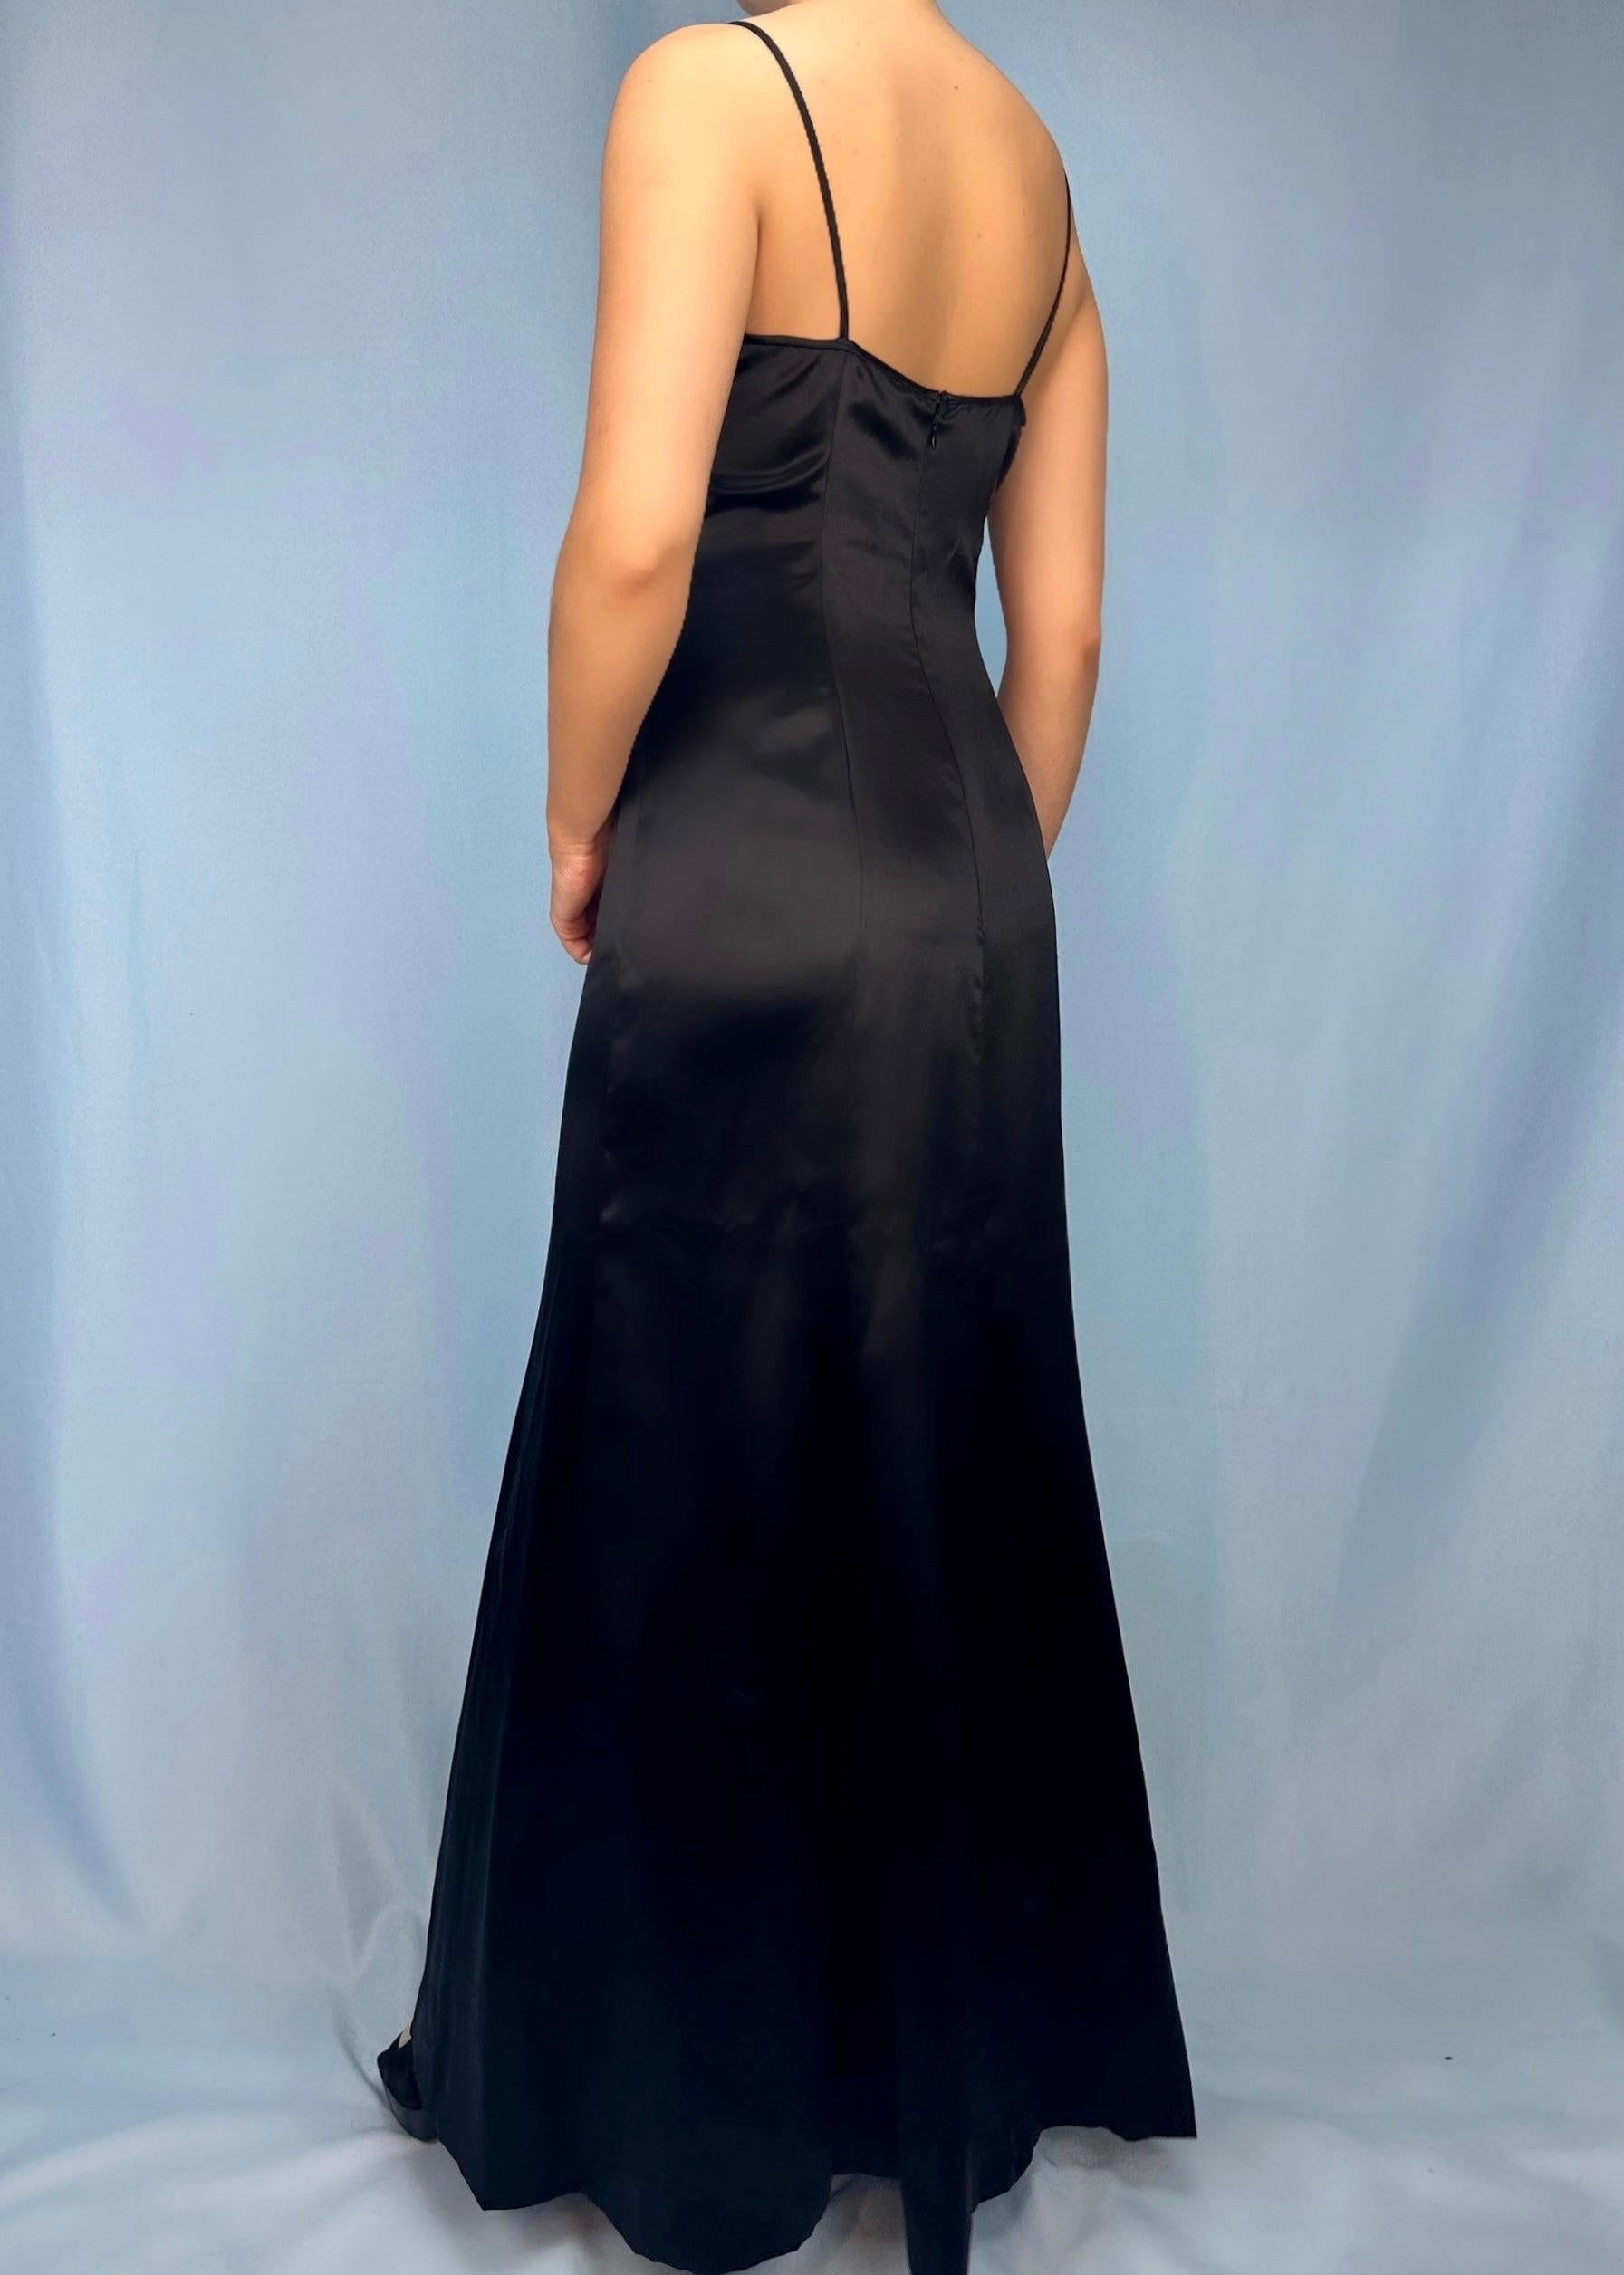 Chanel Fall 1995 Black Silk Satin Gown Dress In Excellent Condition For Sale In Hertfordshire, GB